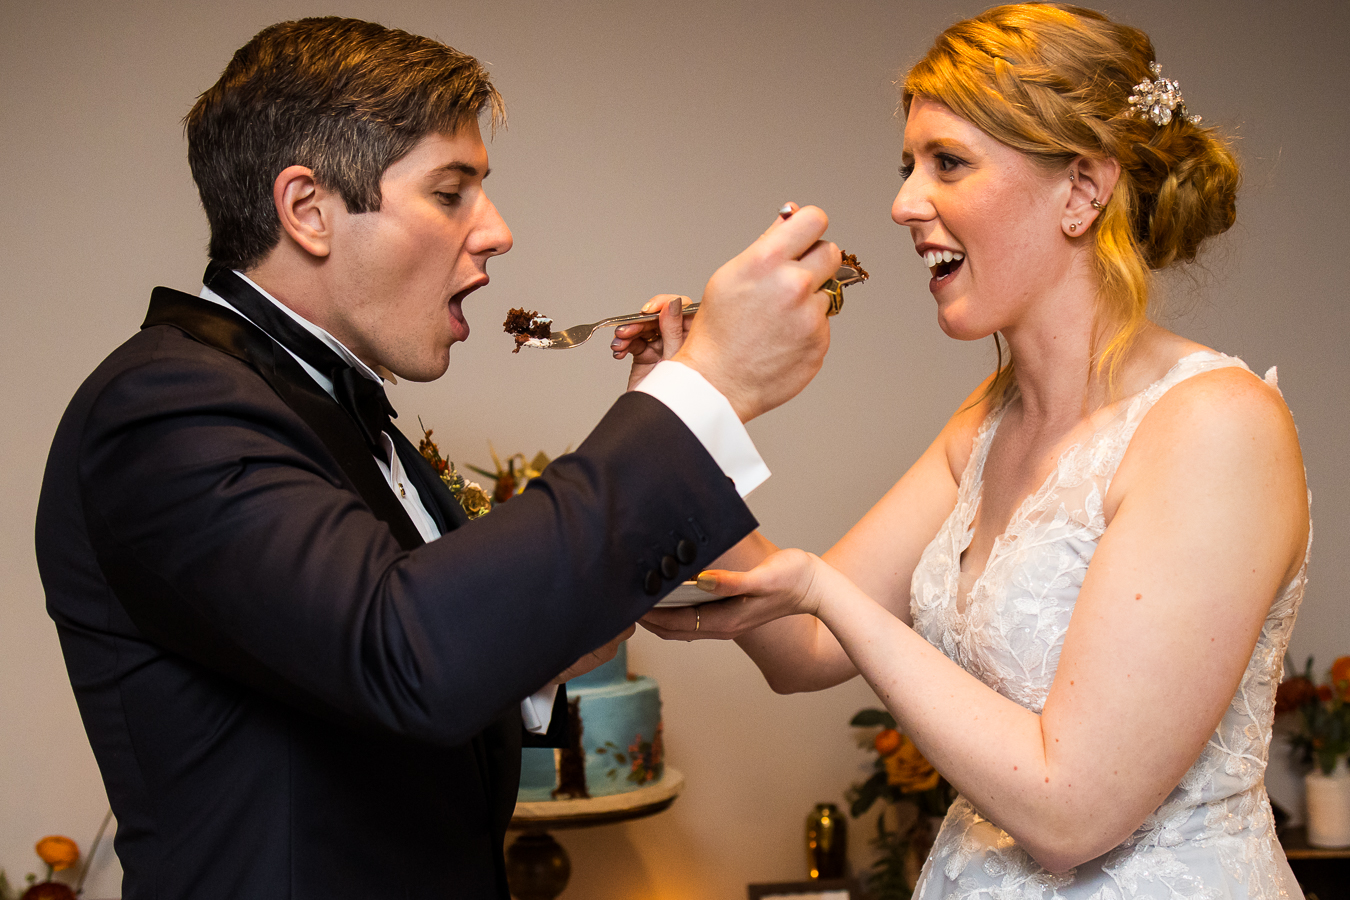 pa wedding photographer, lisa rhinehart, captures this moment between the bride and groom as they share cake with one another during their wedding reception at Elizabeth furnace in lititz pa